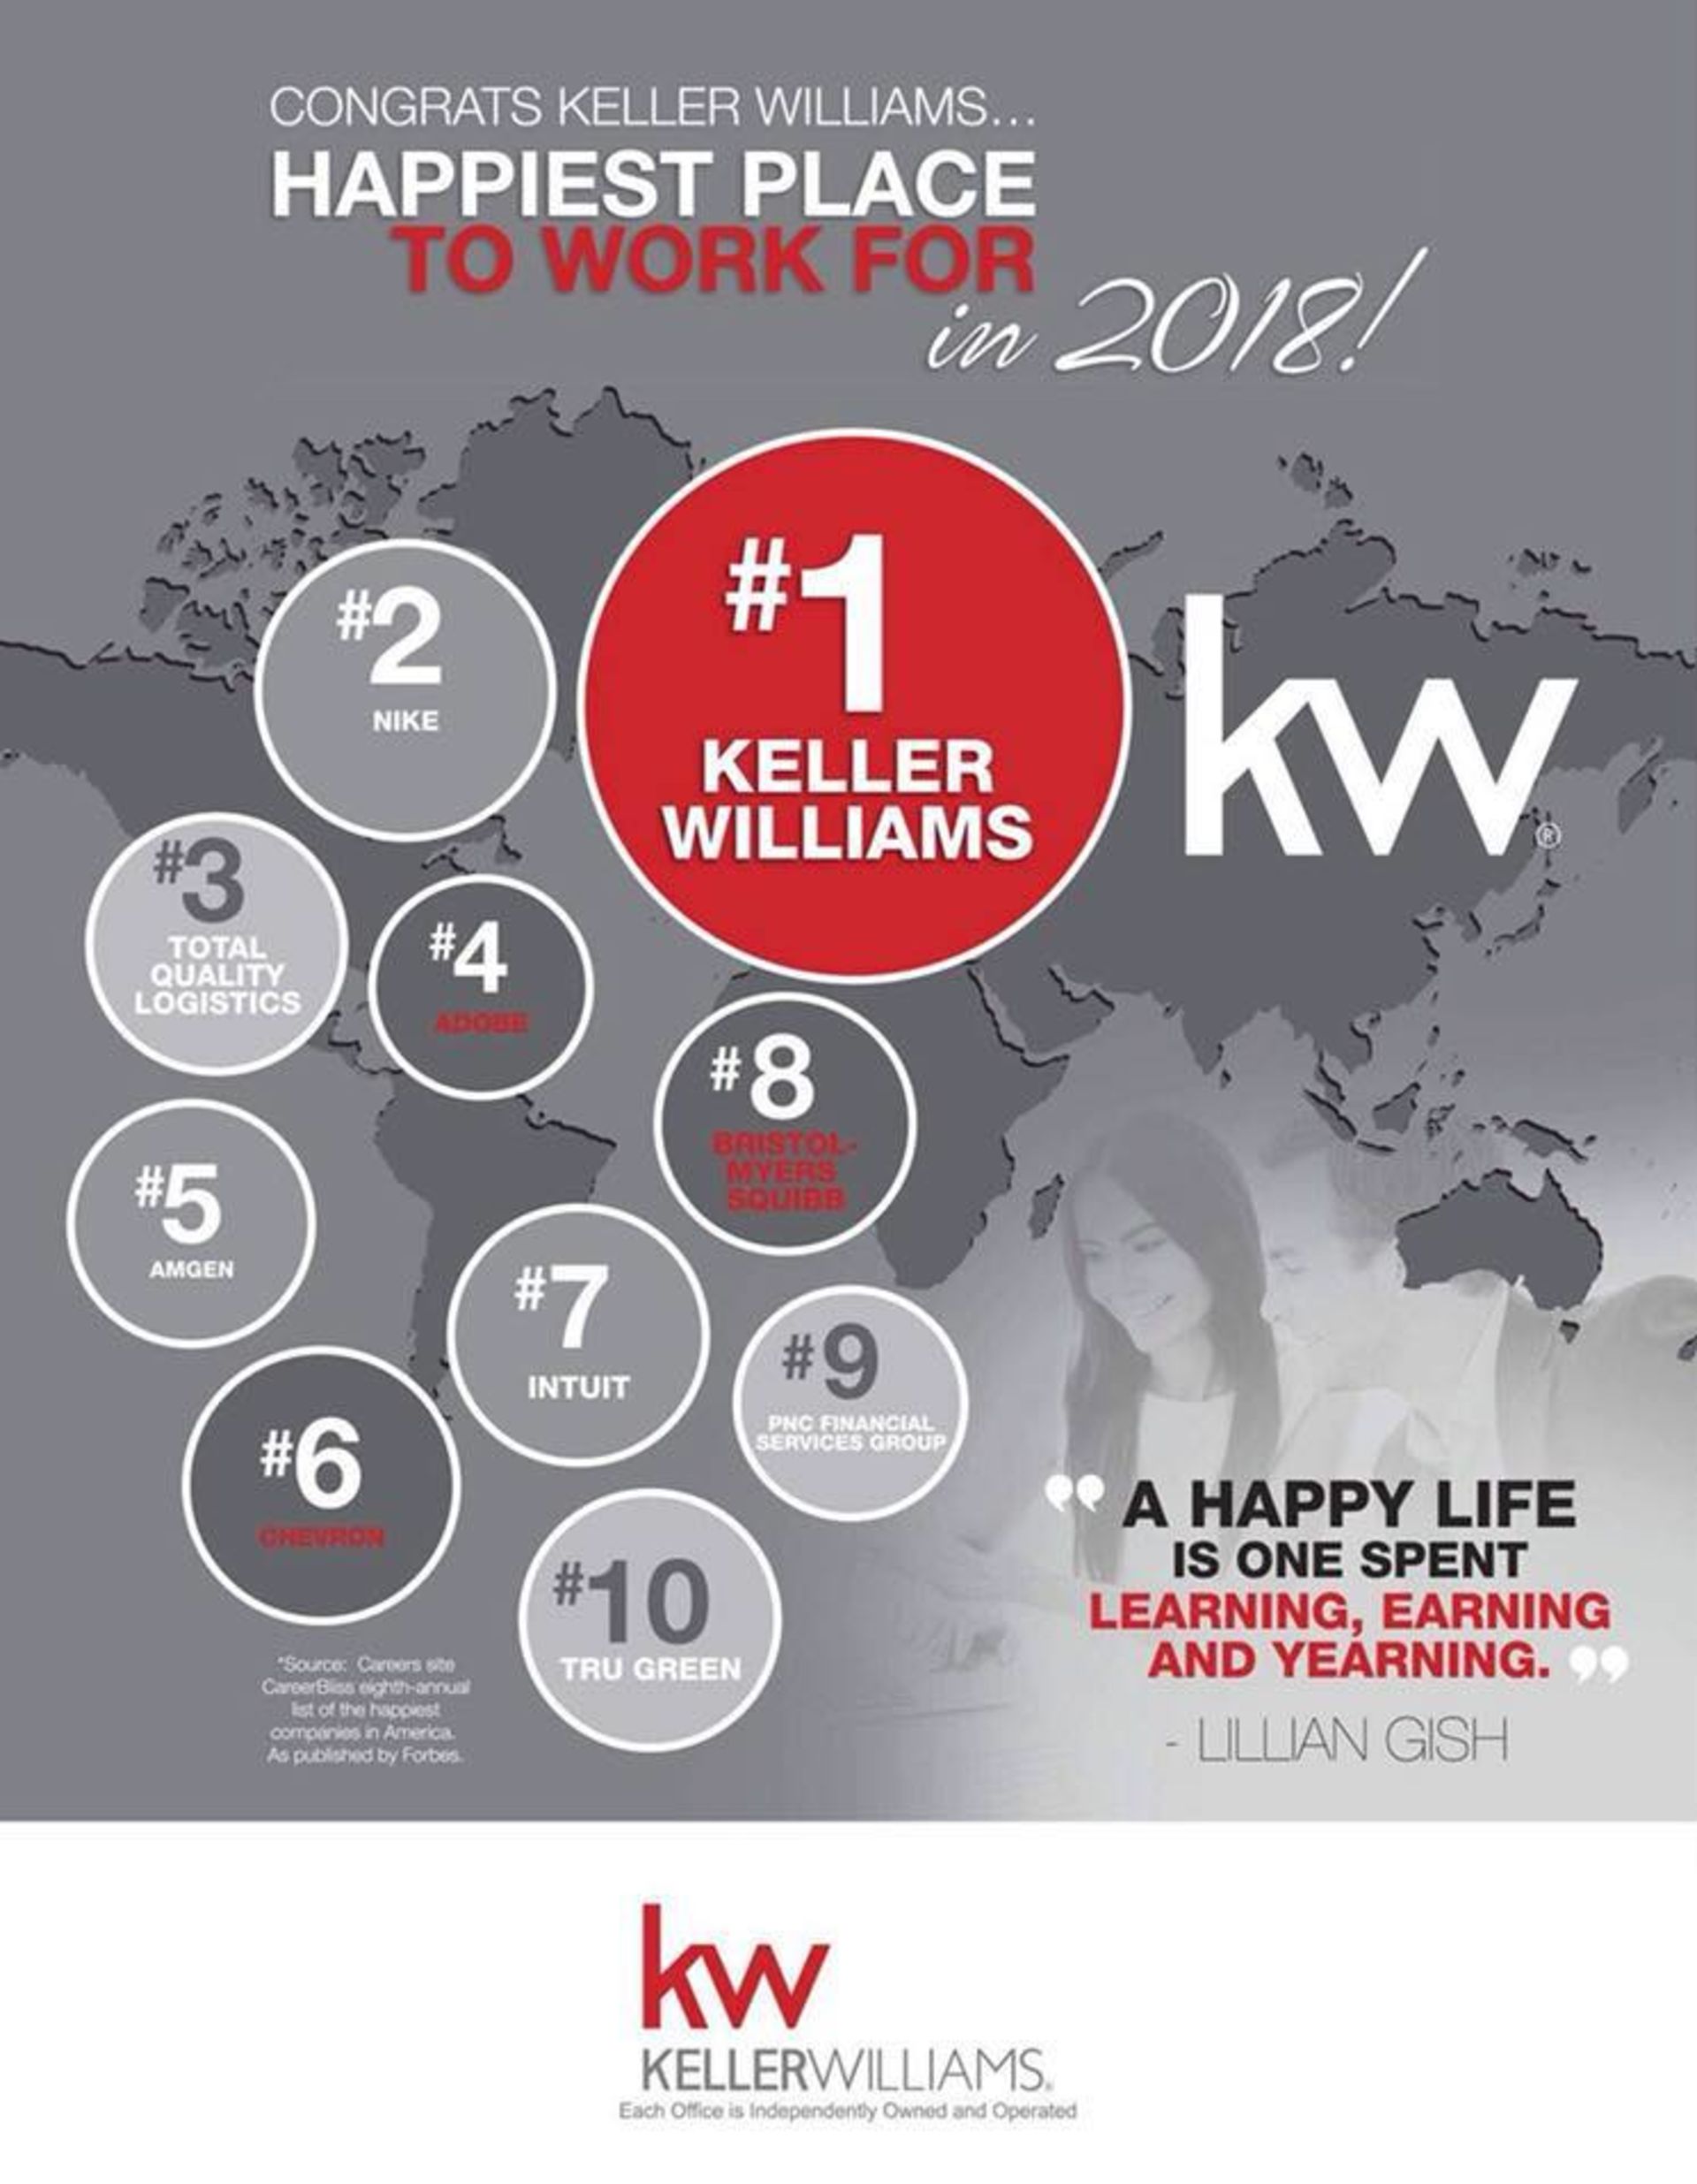 Keller Williams Named Happiest Company To Work For In 2018